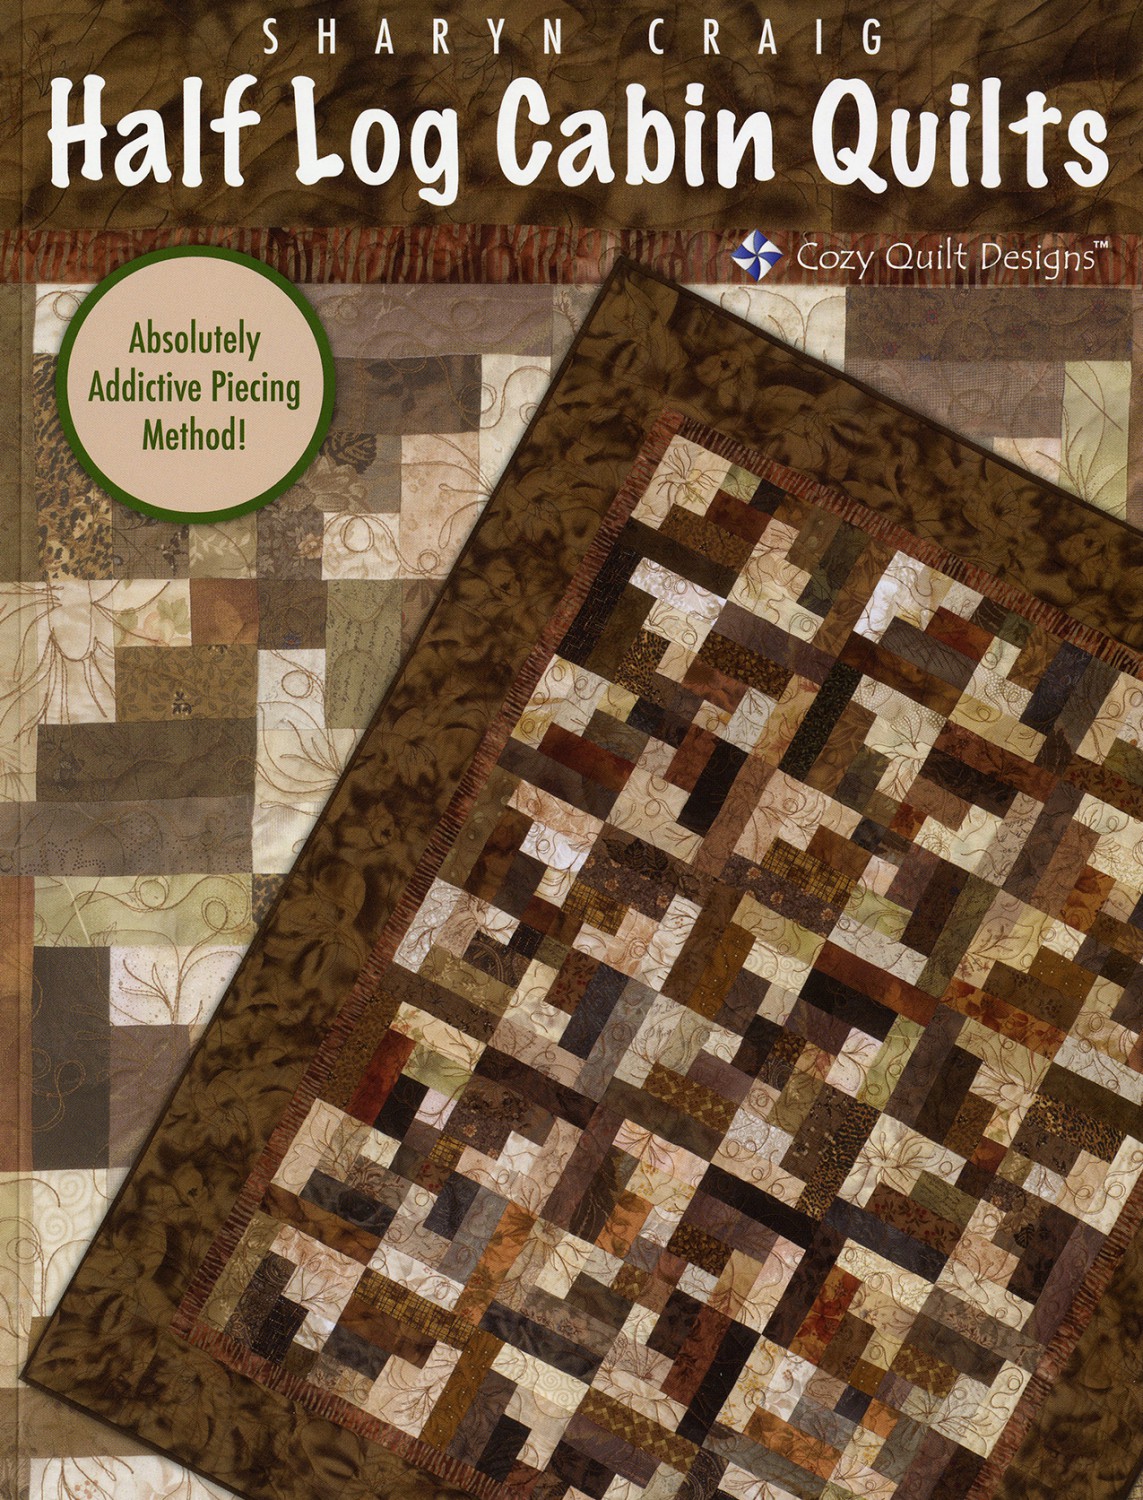 Cozy Quilt Designs Half Log Cabin Quilts Softcover